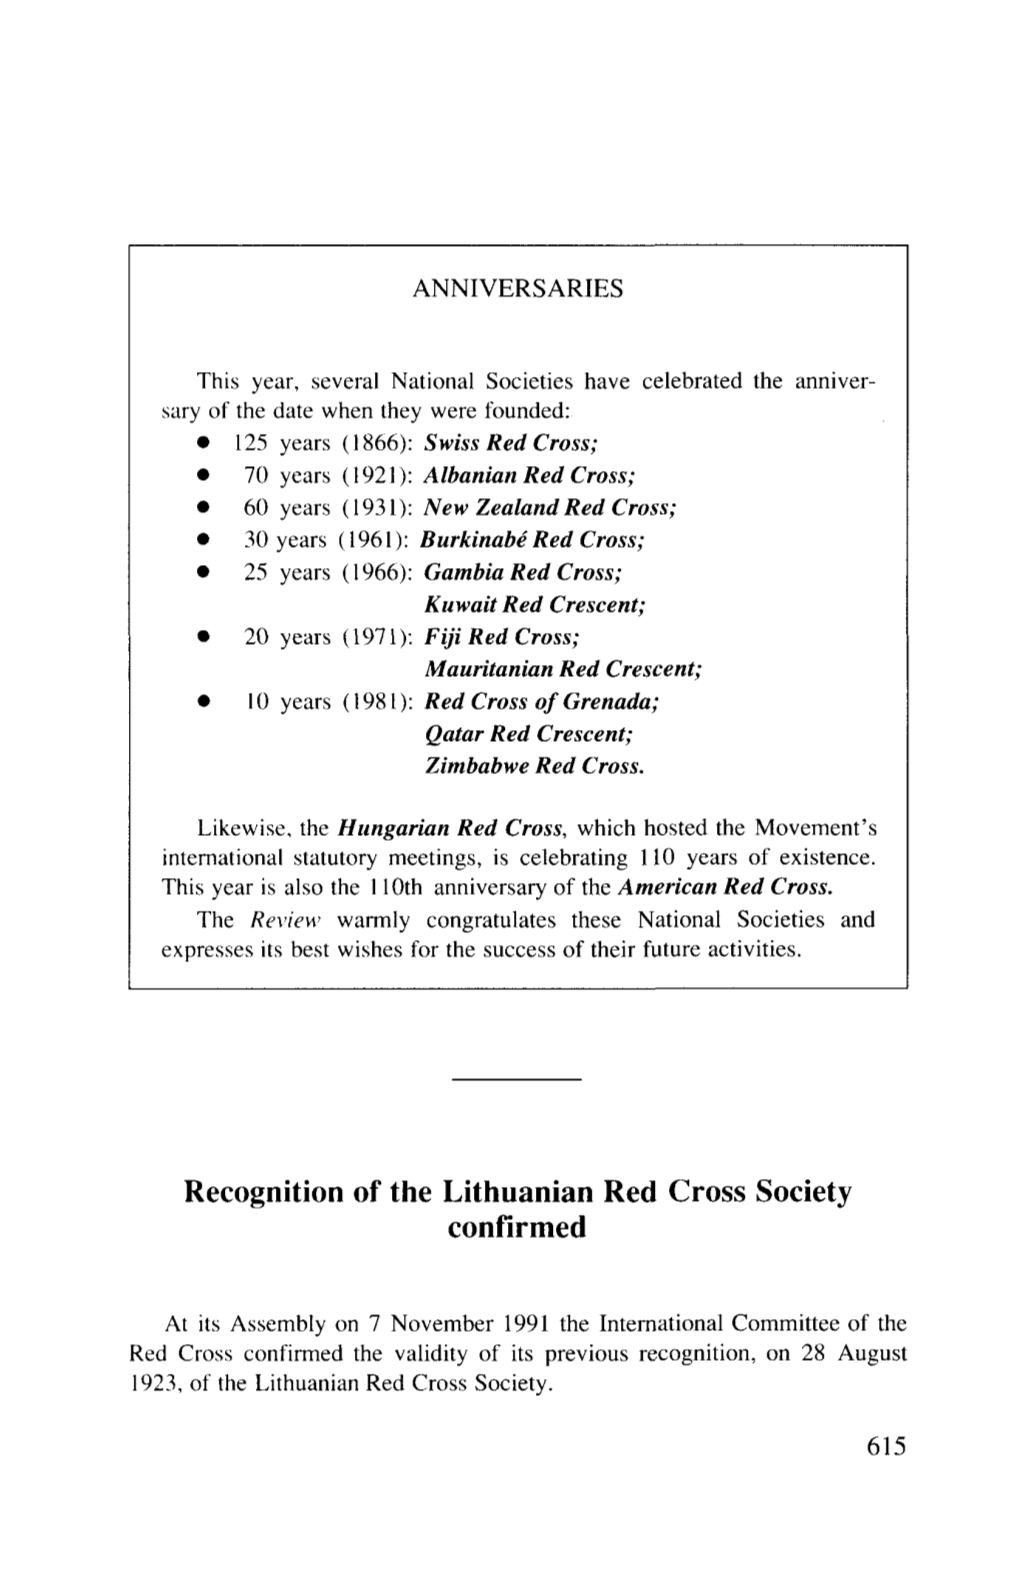 Recognition of the Lithuanian Red Cross Society Confirmed